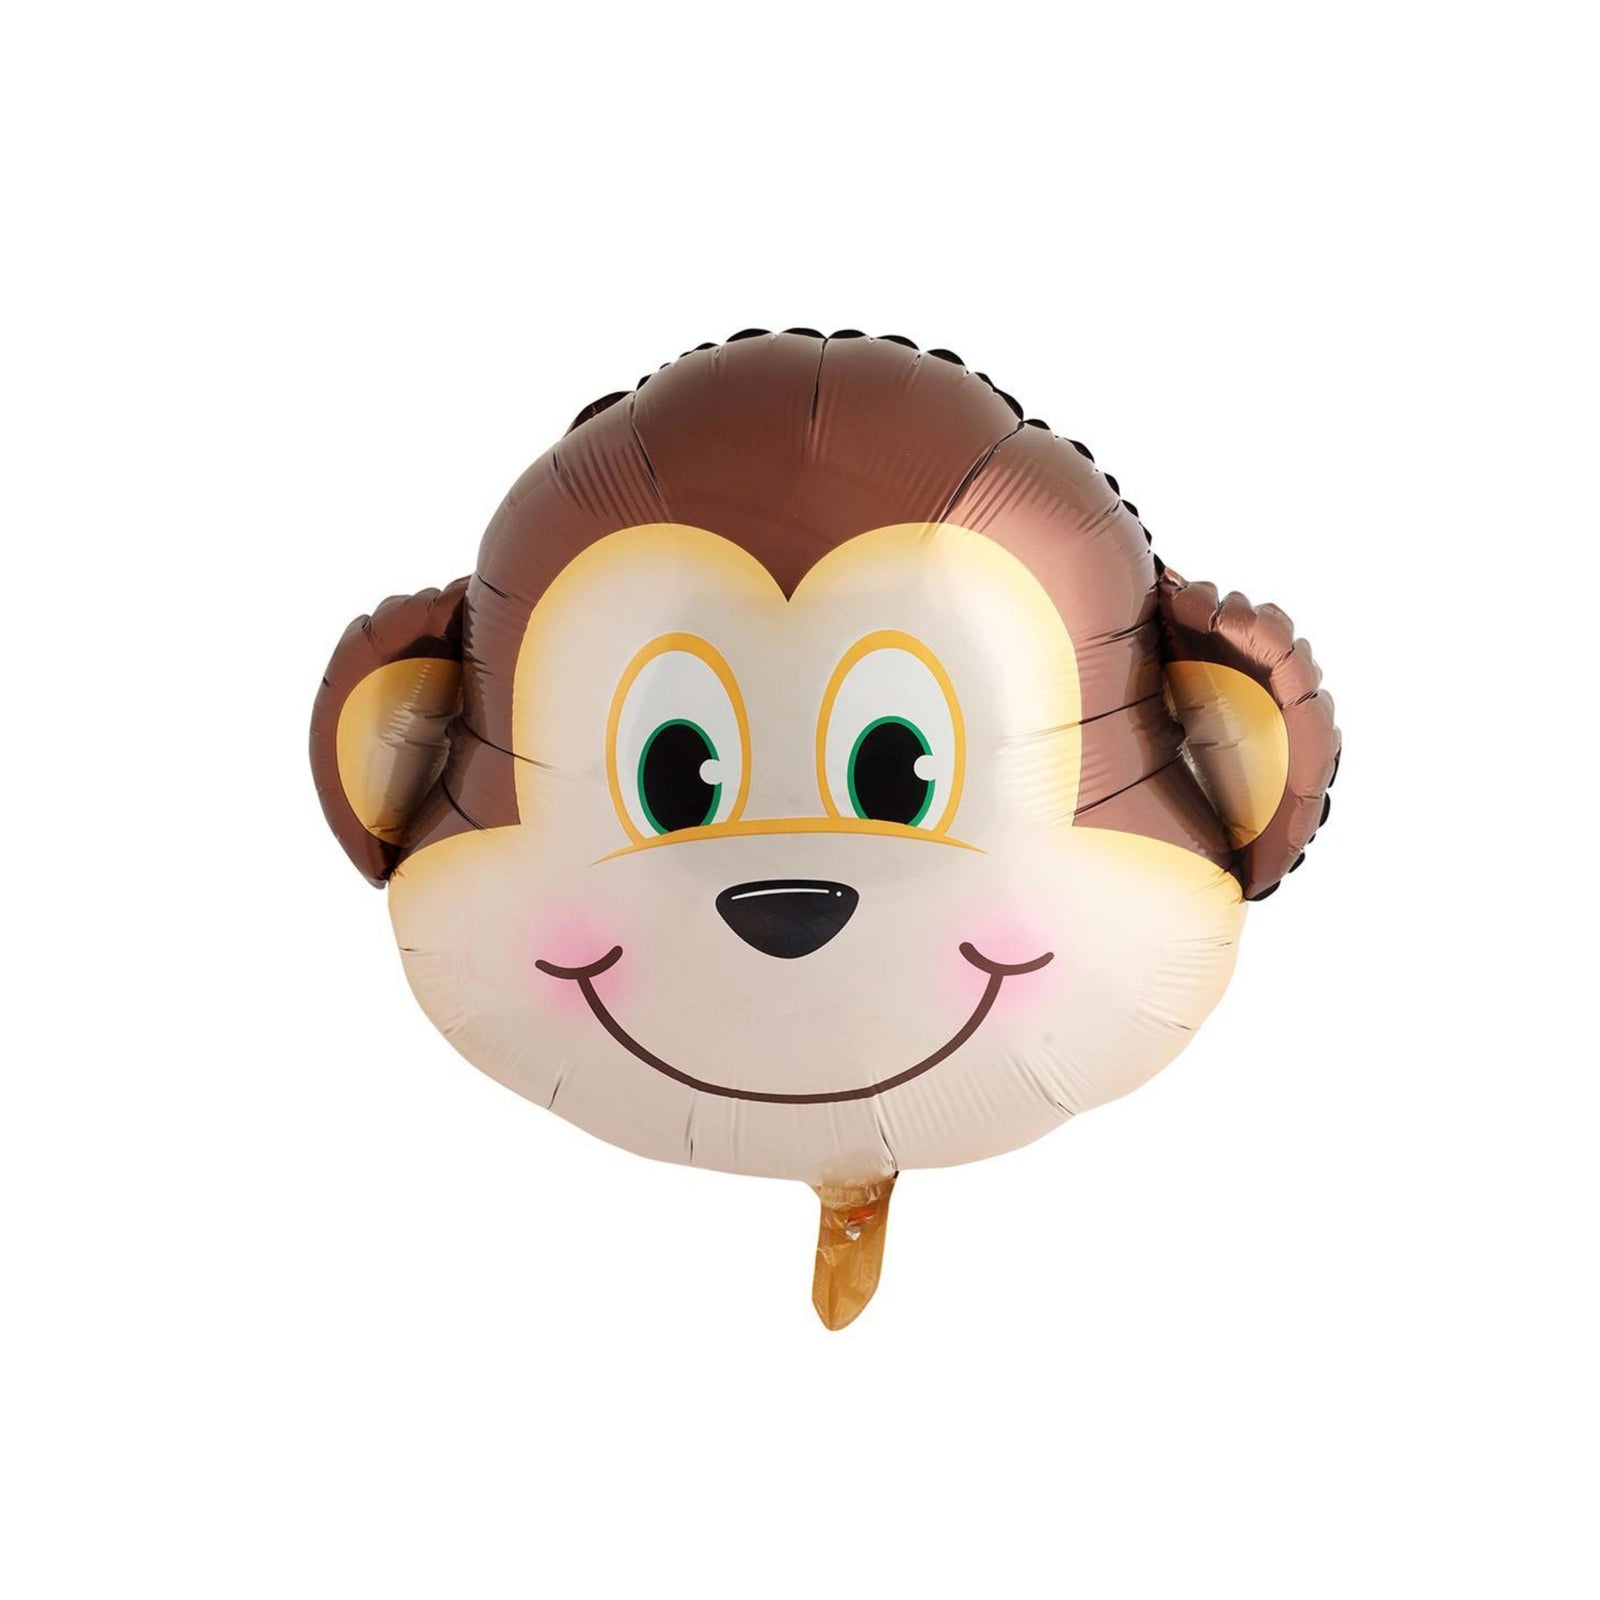 Animal Face Shaped Foil Balloon for Kids Birthday Party, Animal Theme, Zoo Party Decoration- Pack of 1 (Monkey)